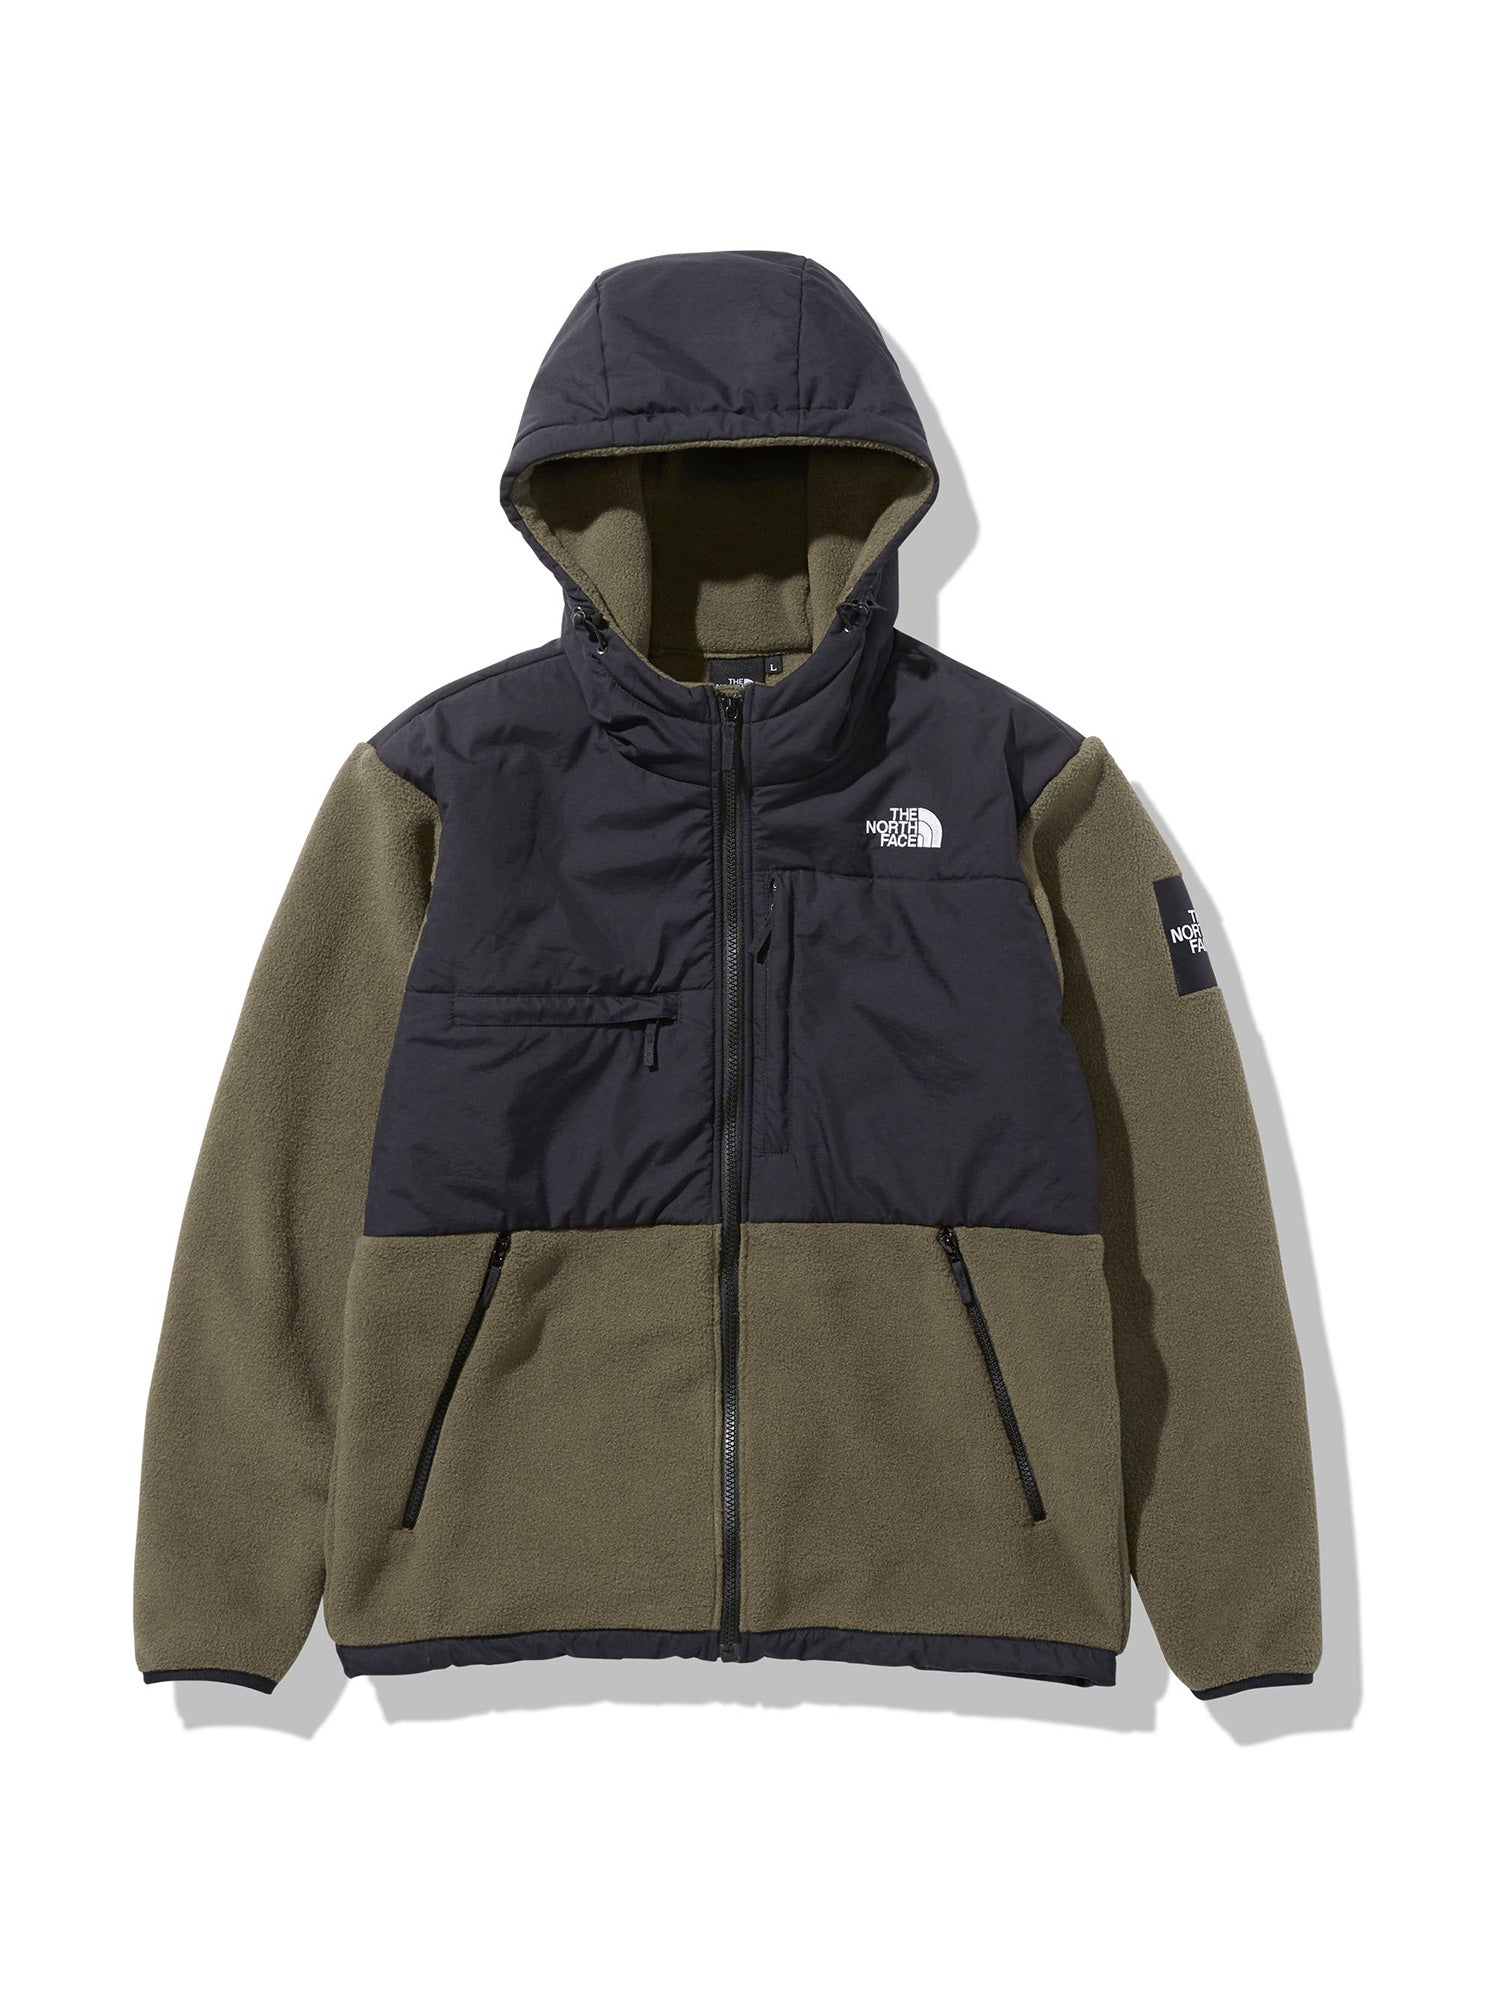 [THE NORTH FACE] Denali Hoody / The North Face Men's Outdoor